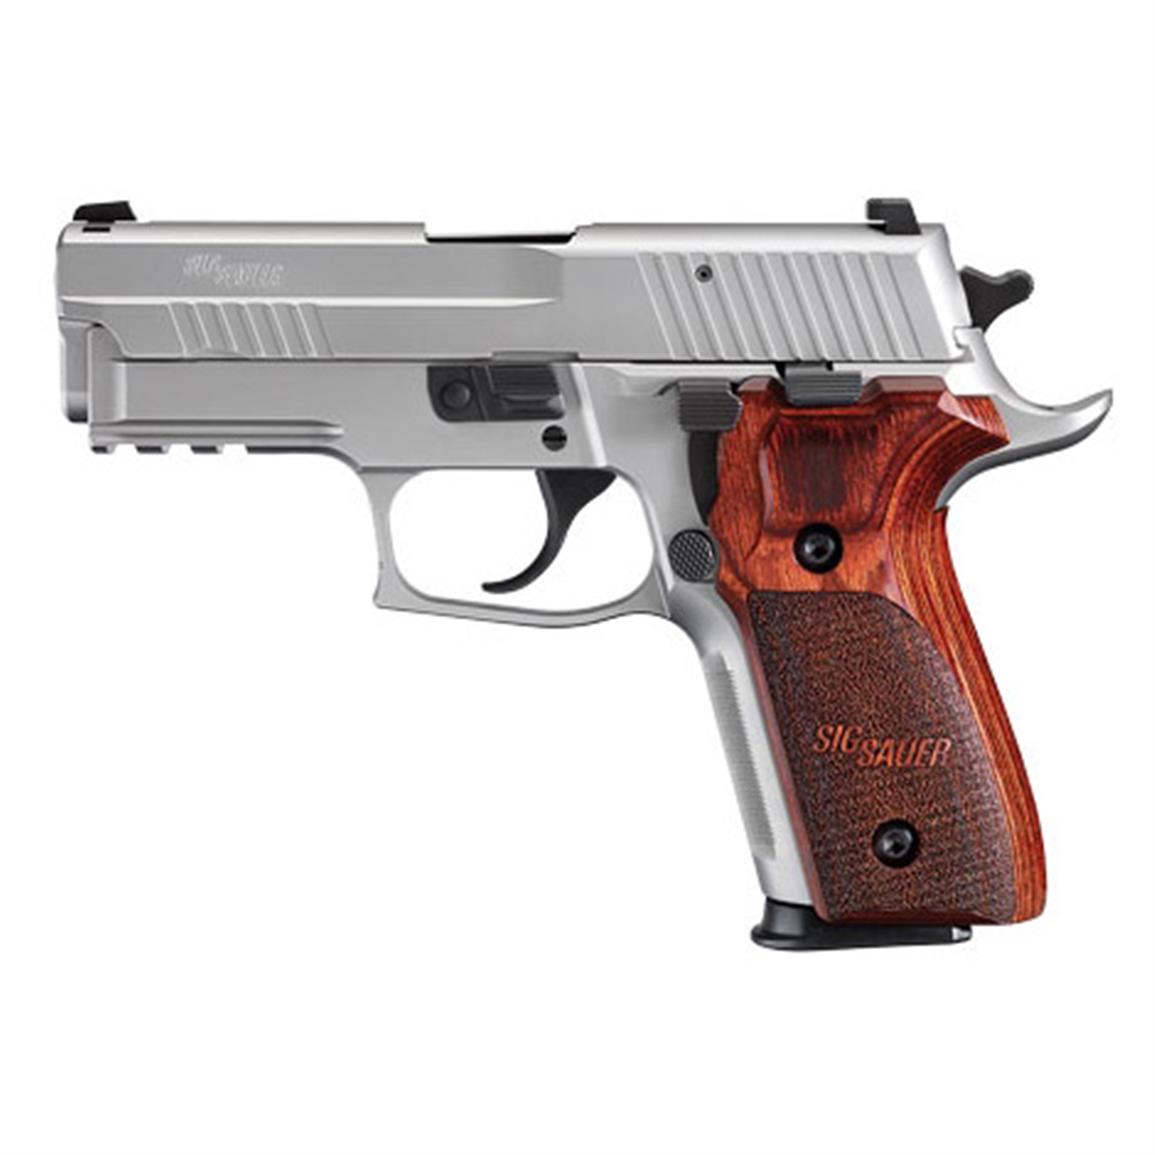 sig-sauer-p229-elite-stainless-semi-automatic-9mm-15-round-capacity